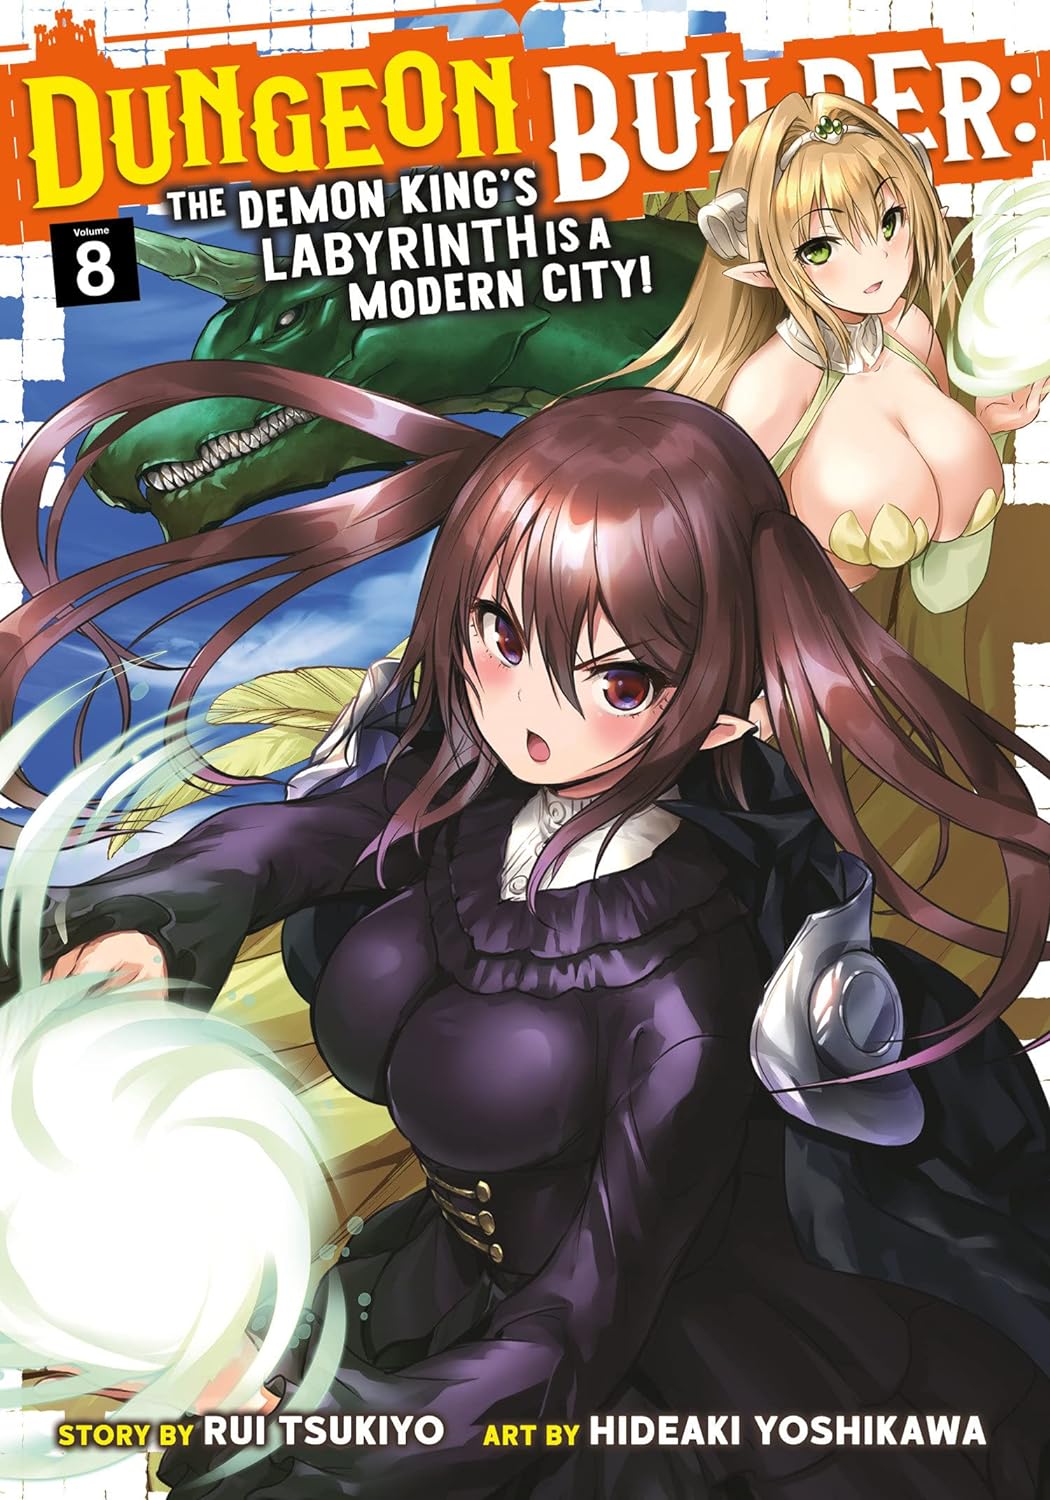 Dungeon Builder: The Demon King's Labyrinth Is a Modern City! (Manga) Vol. 08